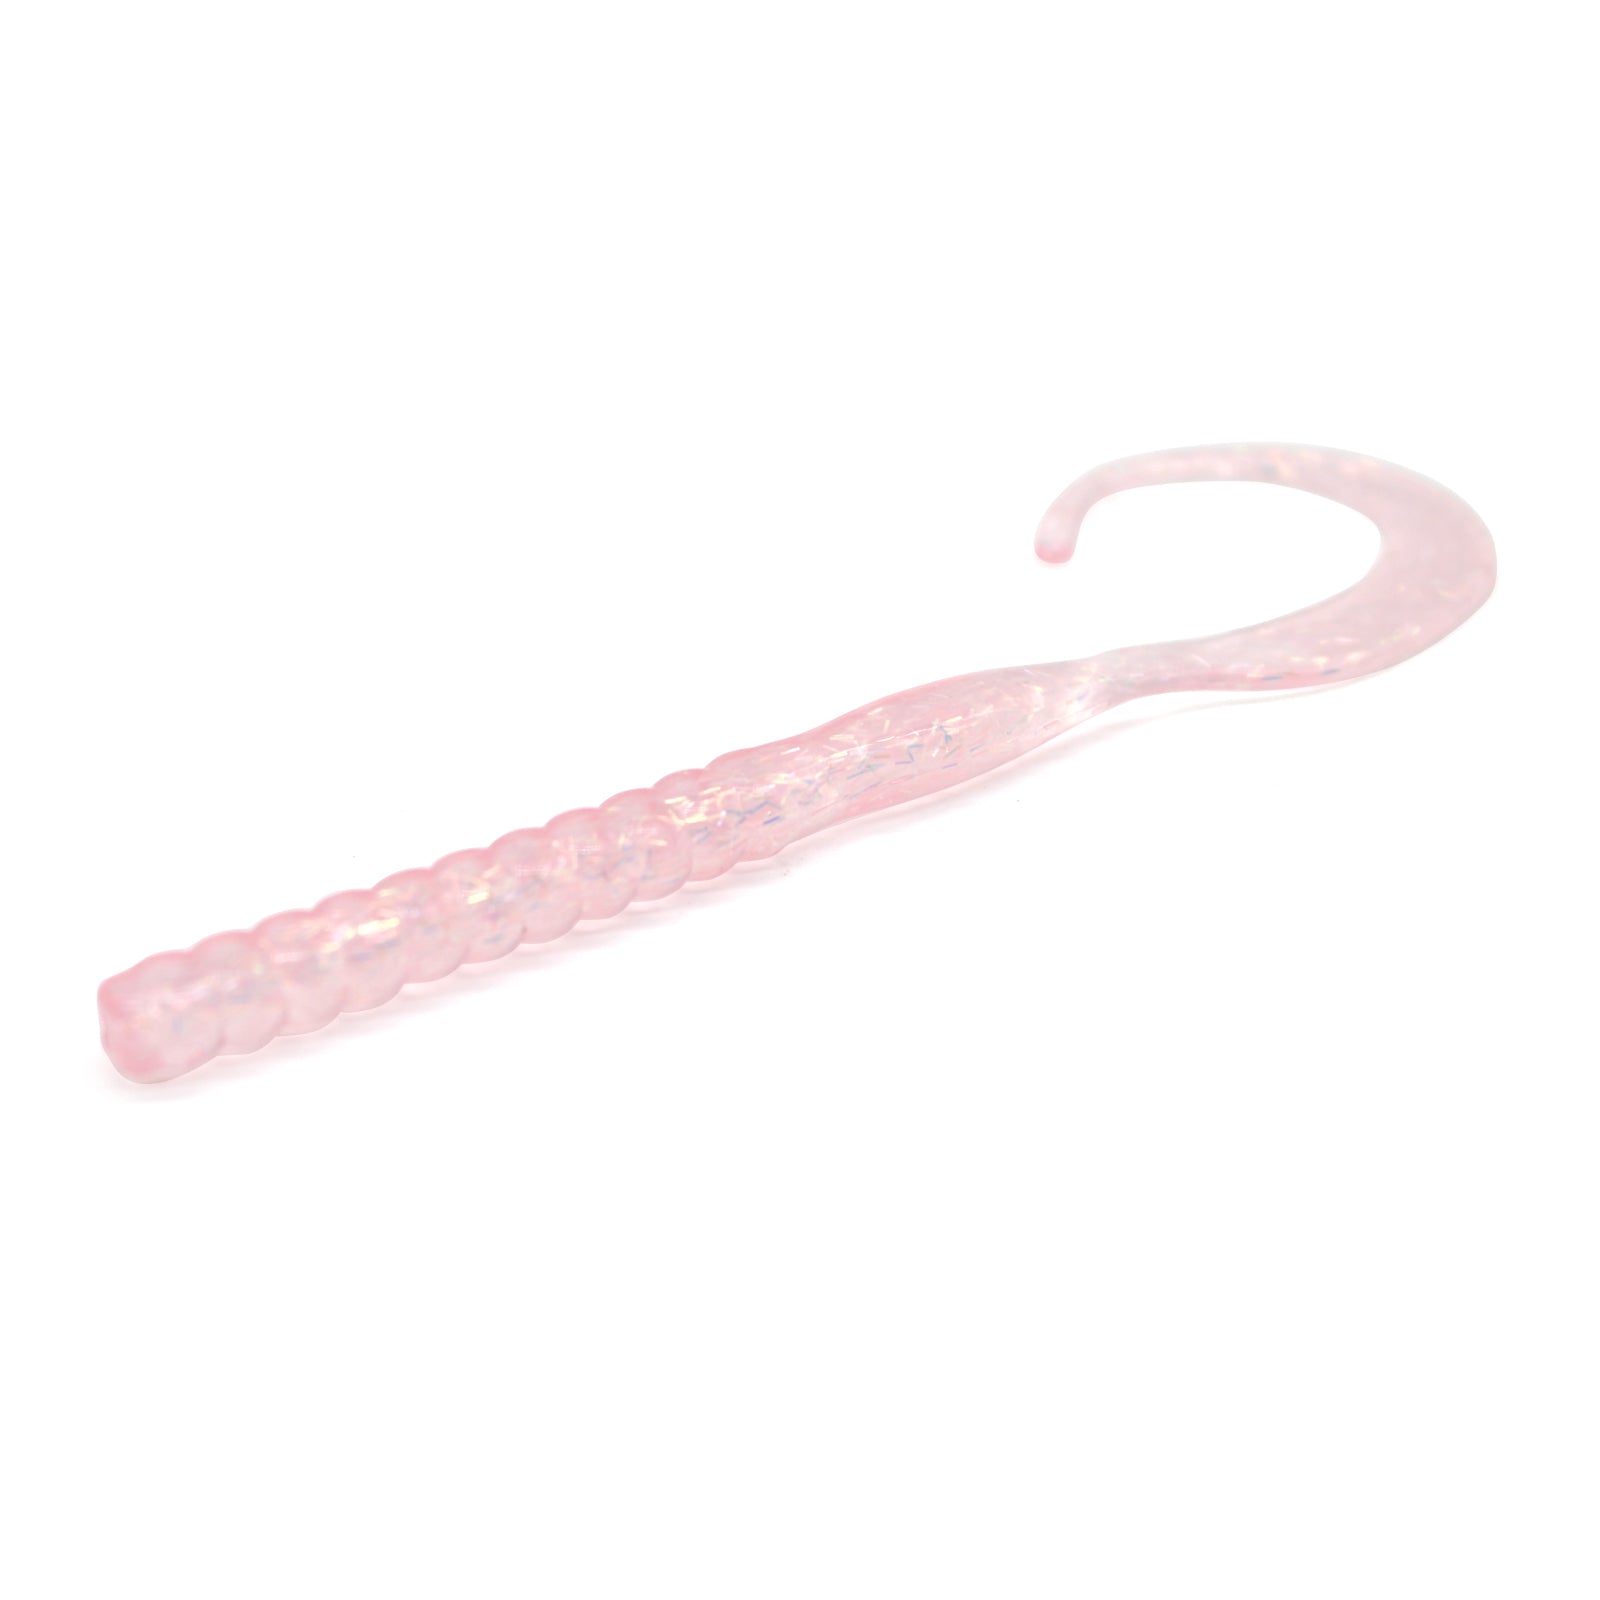 Bass White Jellyworm Fishing Lure